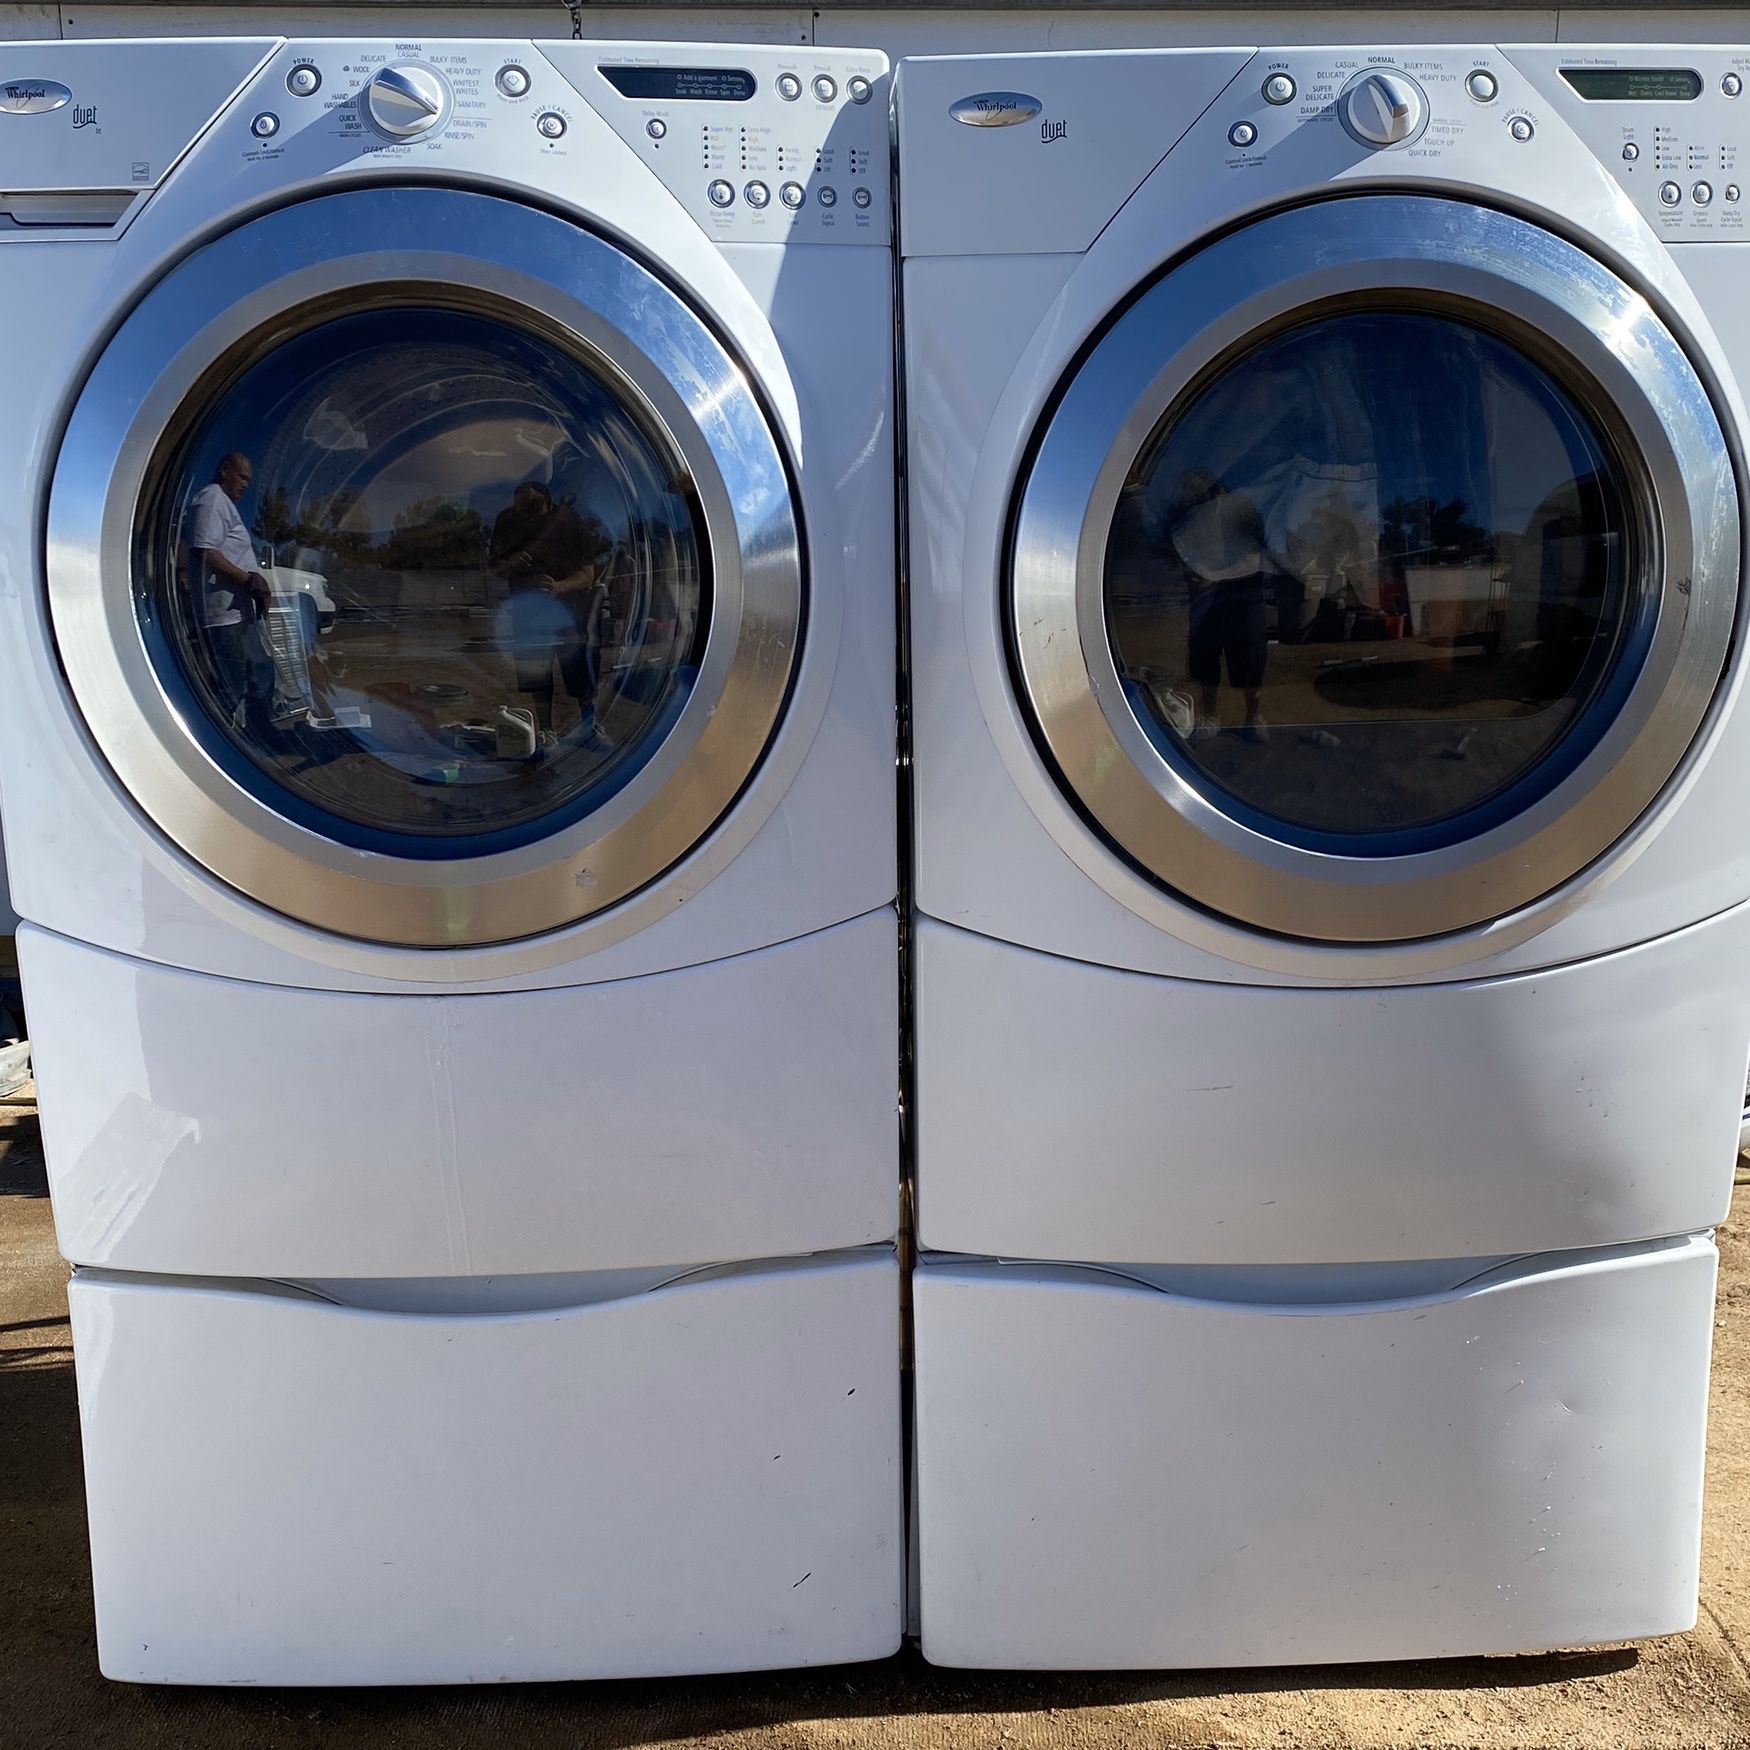 Whirlpool Duet Washer And Dryer Set With Pedestals